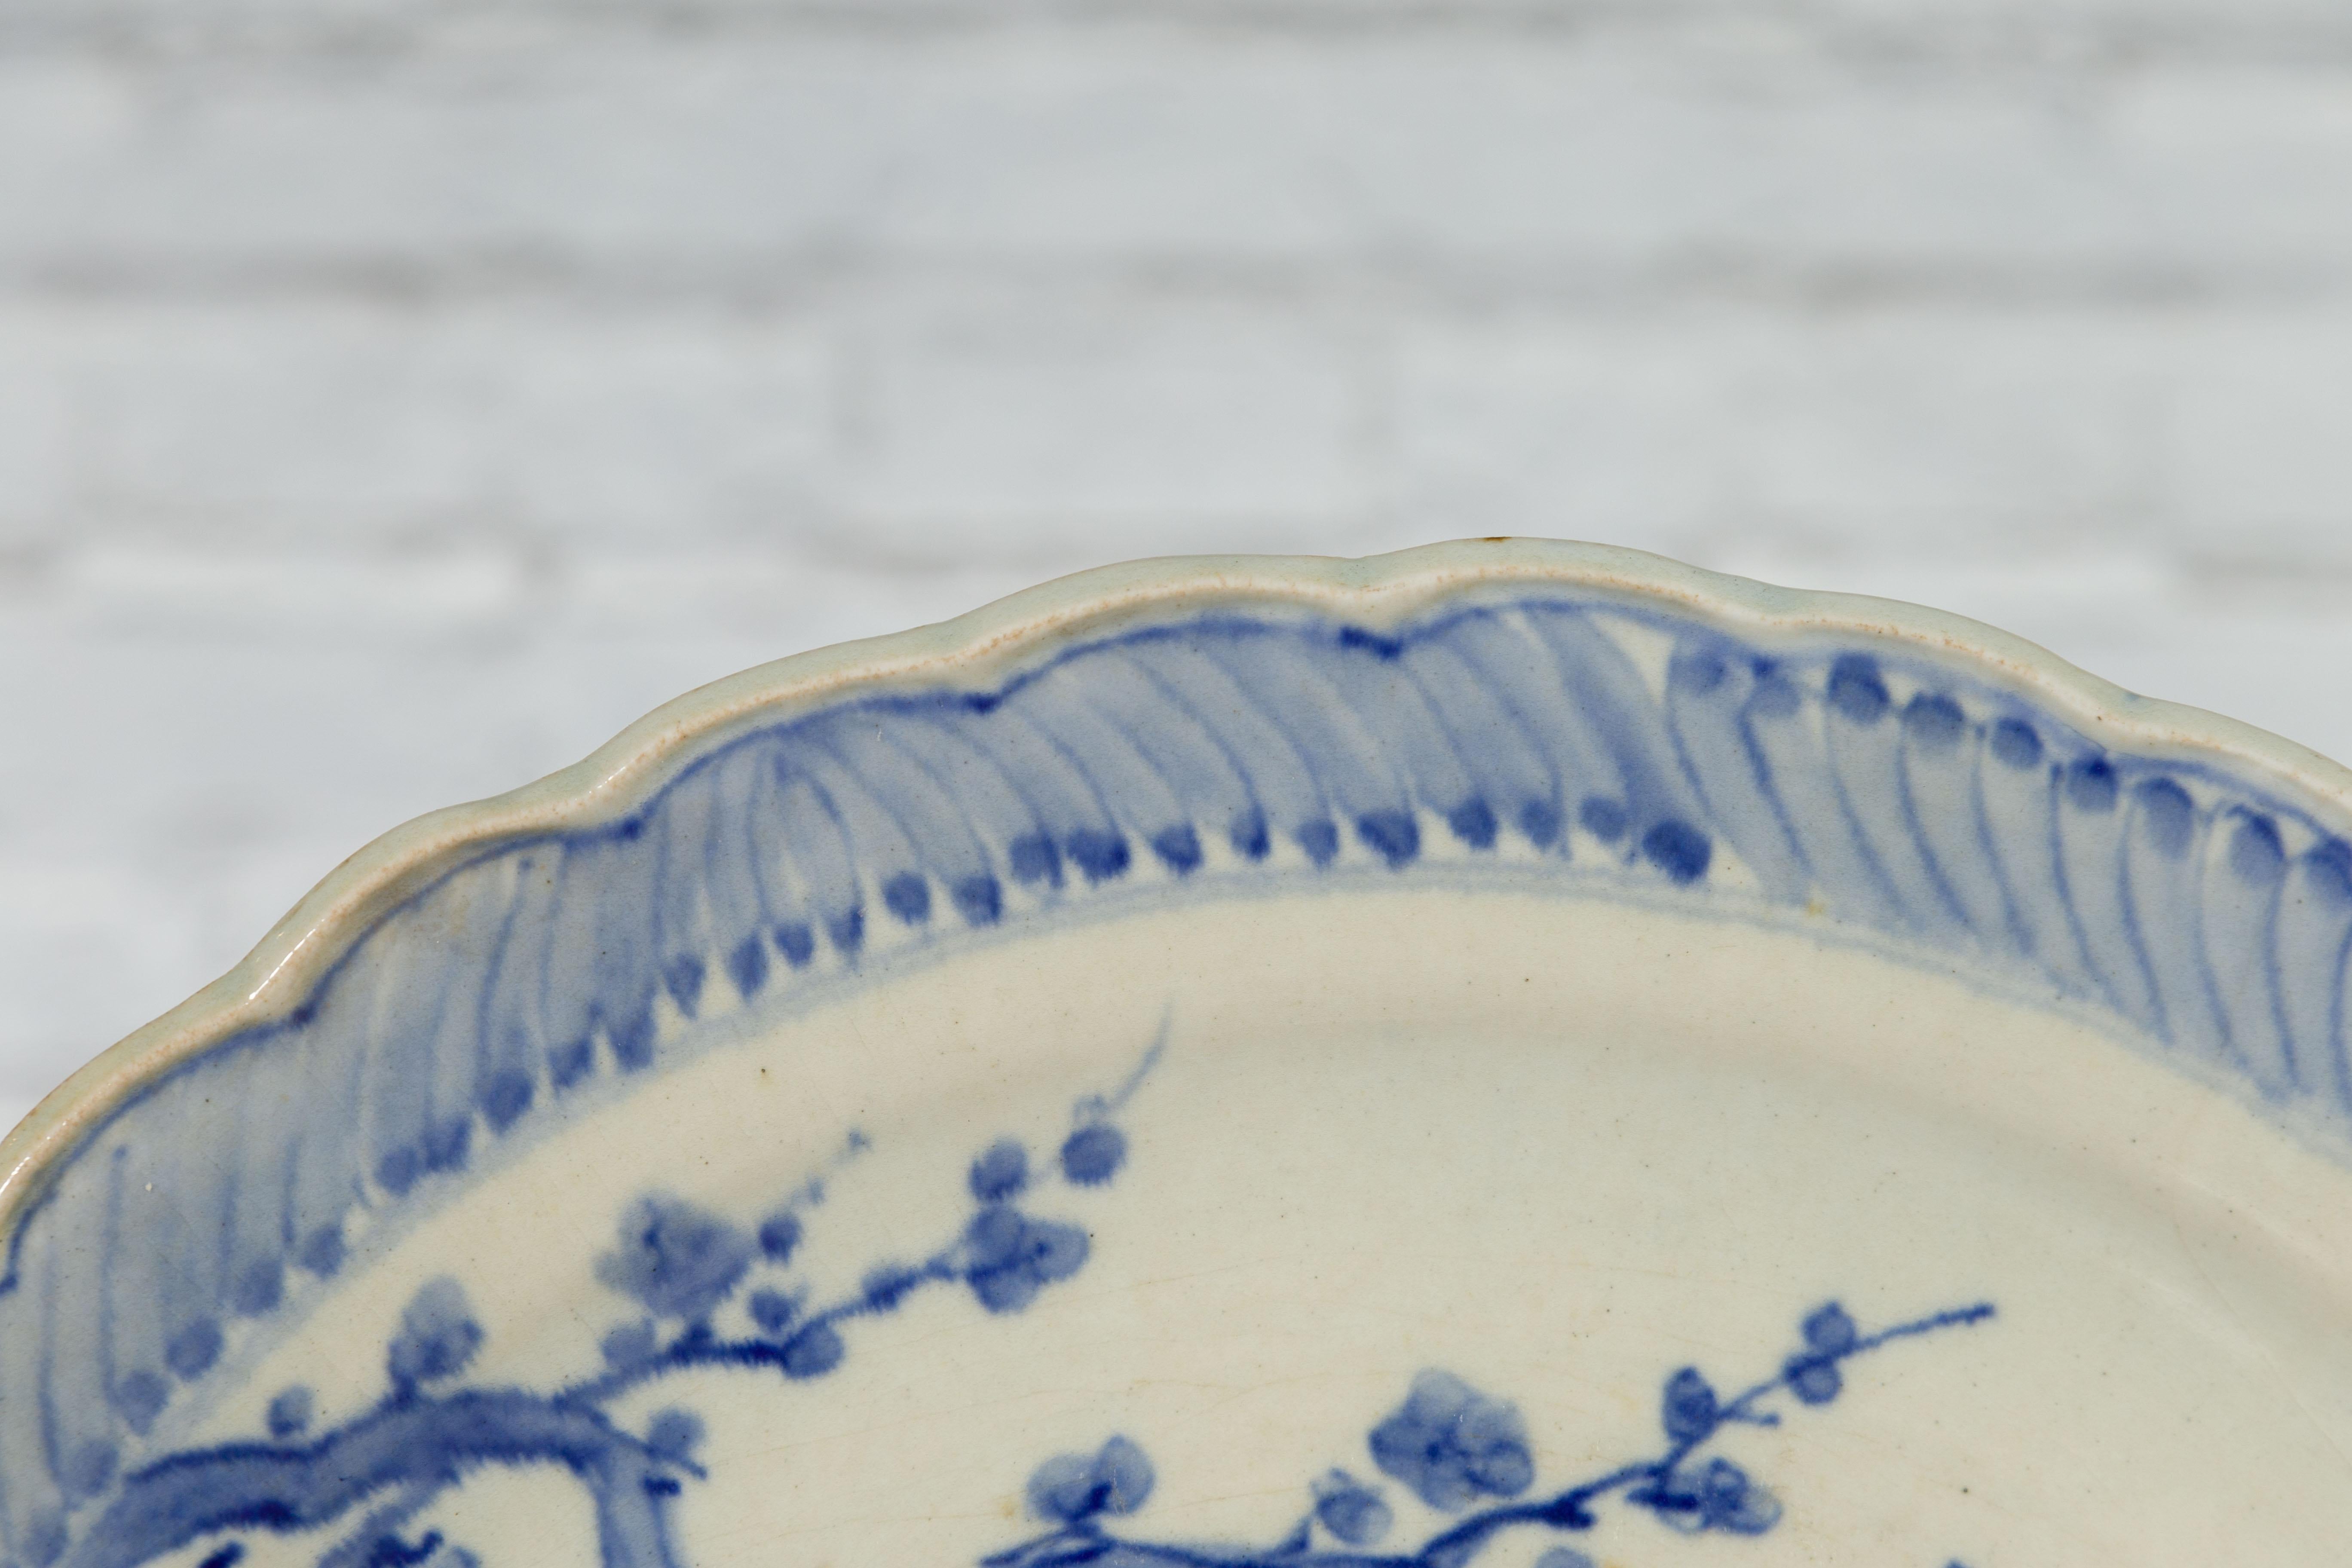 Japanese Hand-Painted Blue and White Porcelain Charger Plate with Foliage Décor For Sale 9